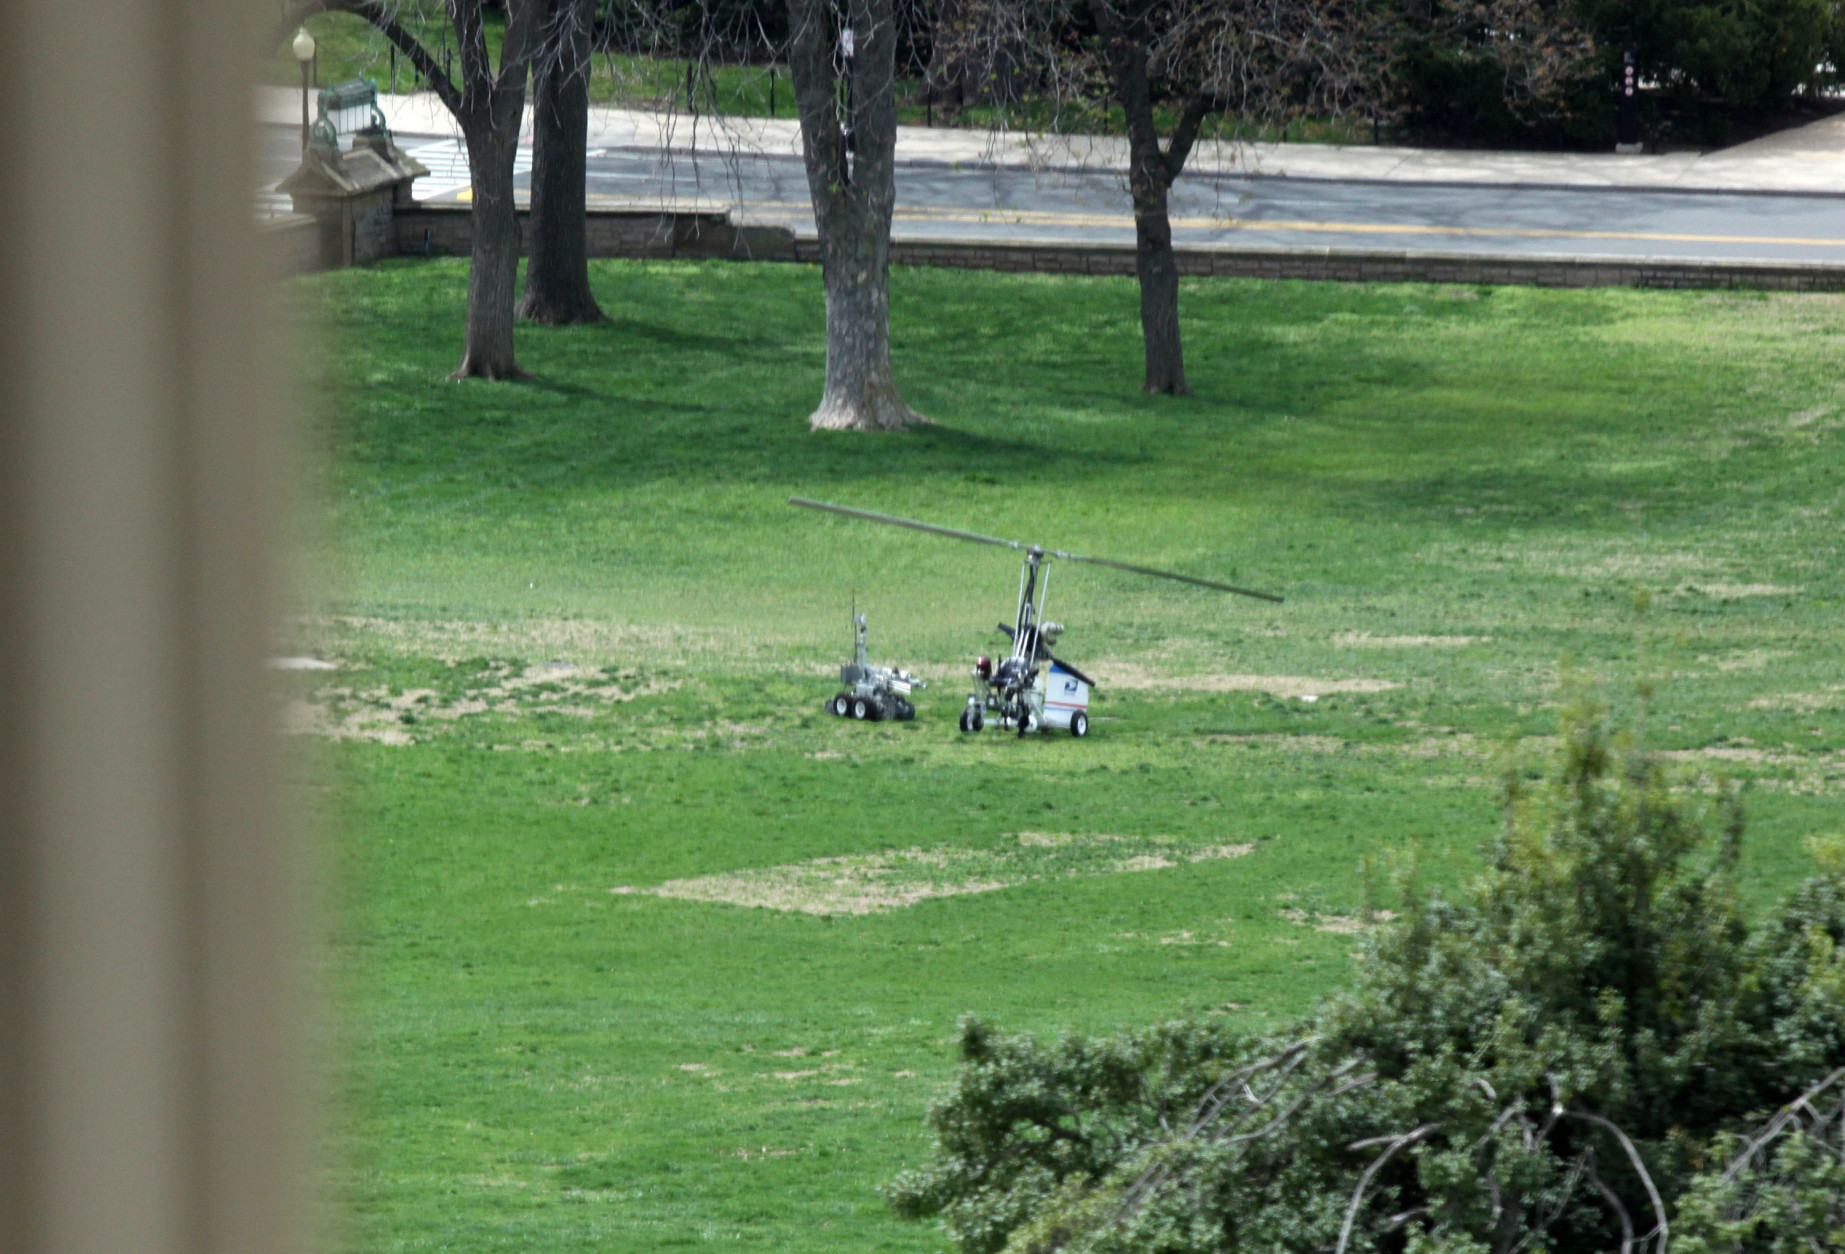 A police device rolls toward a copter device, right, that landed on the West Front of the Capitol in Washington, Wednesday, April 15, 2015. A small one-person helicopter has landed on the West Lawn of the U.S. Capitol, prompting a temporary lockdown of the Capitol Visitor's Center. Capitol Police approached the aircraft shortly after it touched down and took its pilot into custody. (AP Photo/Lauren Victoria Burke)